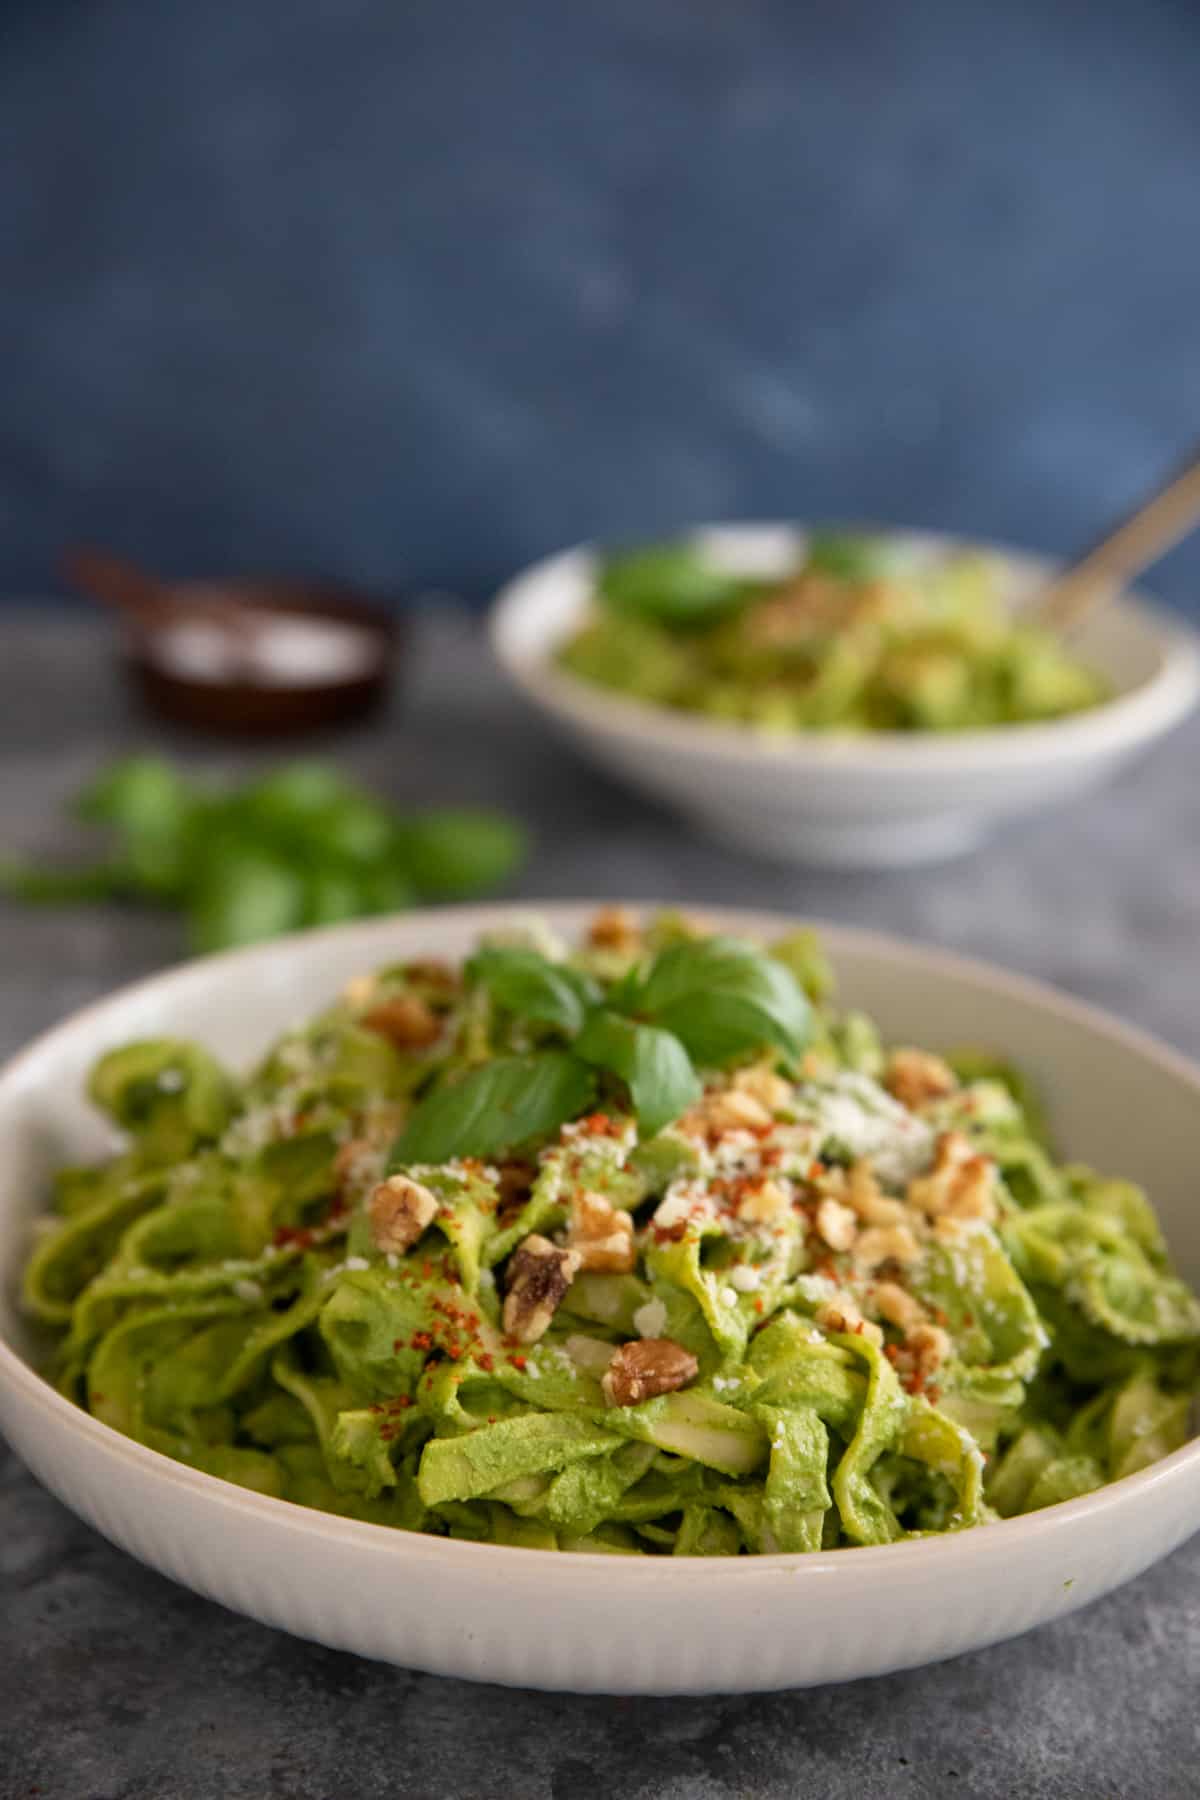 This spinach pesto pasta is creamy and rich, plus it's loaded with vegetables. Easy to make and ready in 30 minutes, this vegetarian pasta is both healthy and delicious.